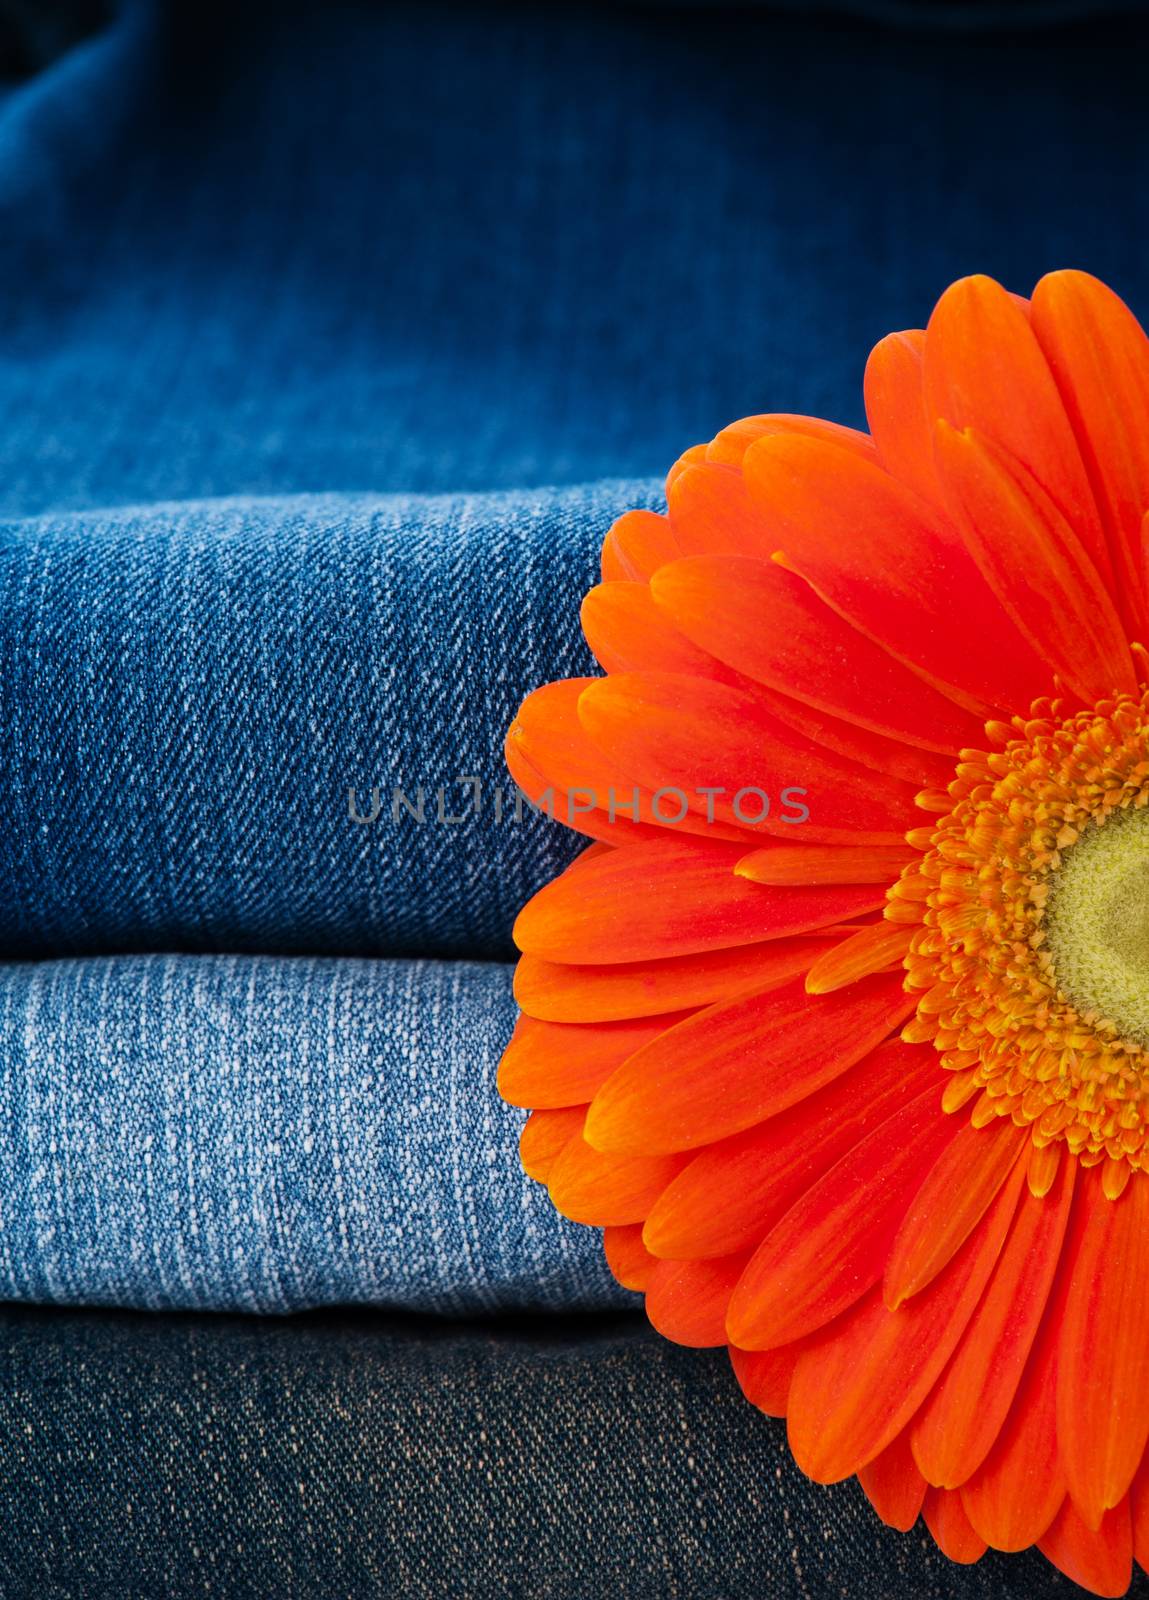 Pile of jeans of various shades and orange gerbera daisy 